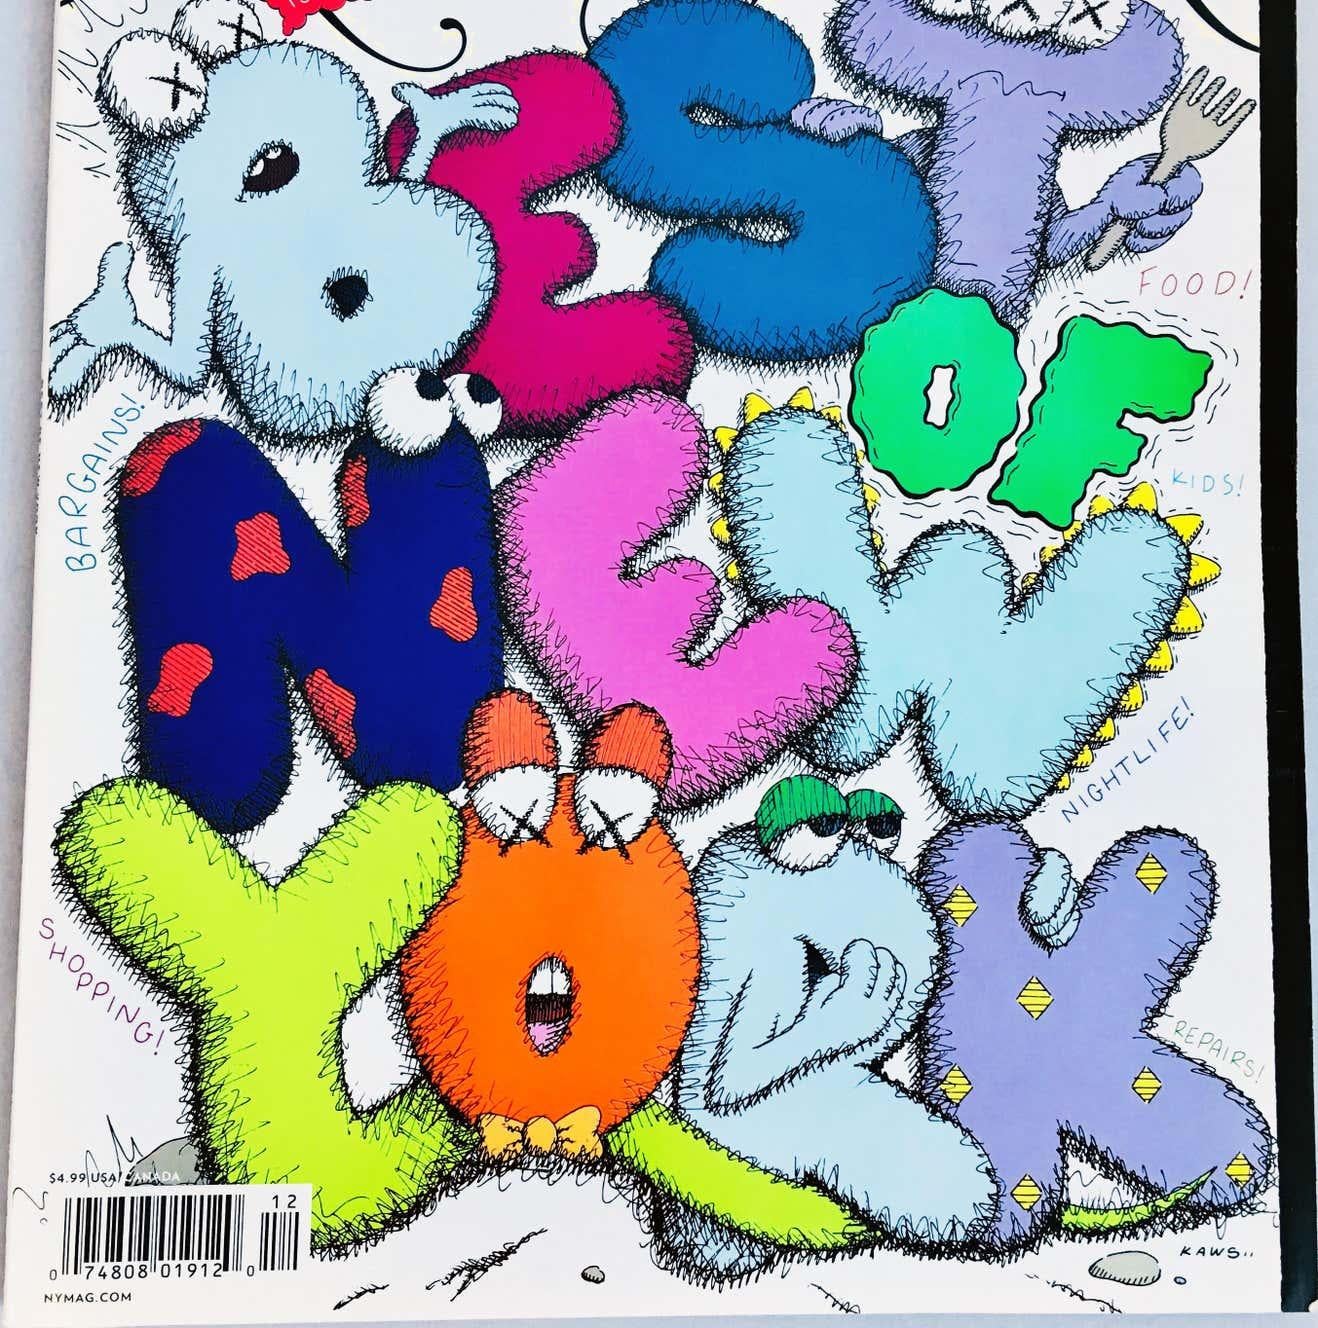 KAWS cover art 2009:
After previously working on the covers of ID magazine and complex, Kaws did the cover art for New York Magazine’s “Best Of New York 2009” issue.

Approximately measures: 9 x 12 inches, minor signs of handling; otherwise very